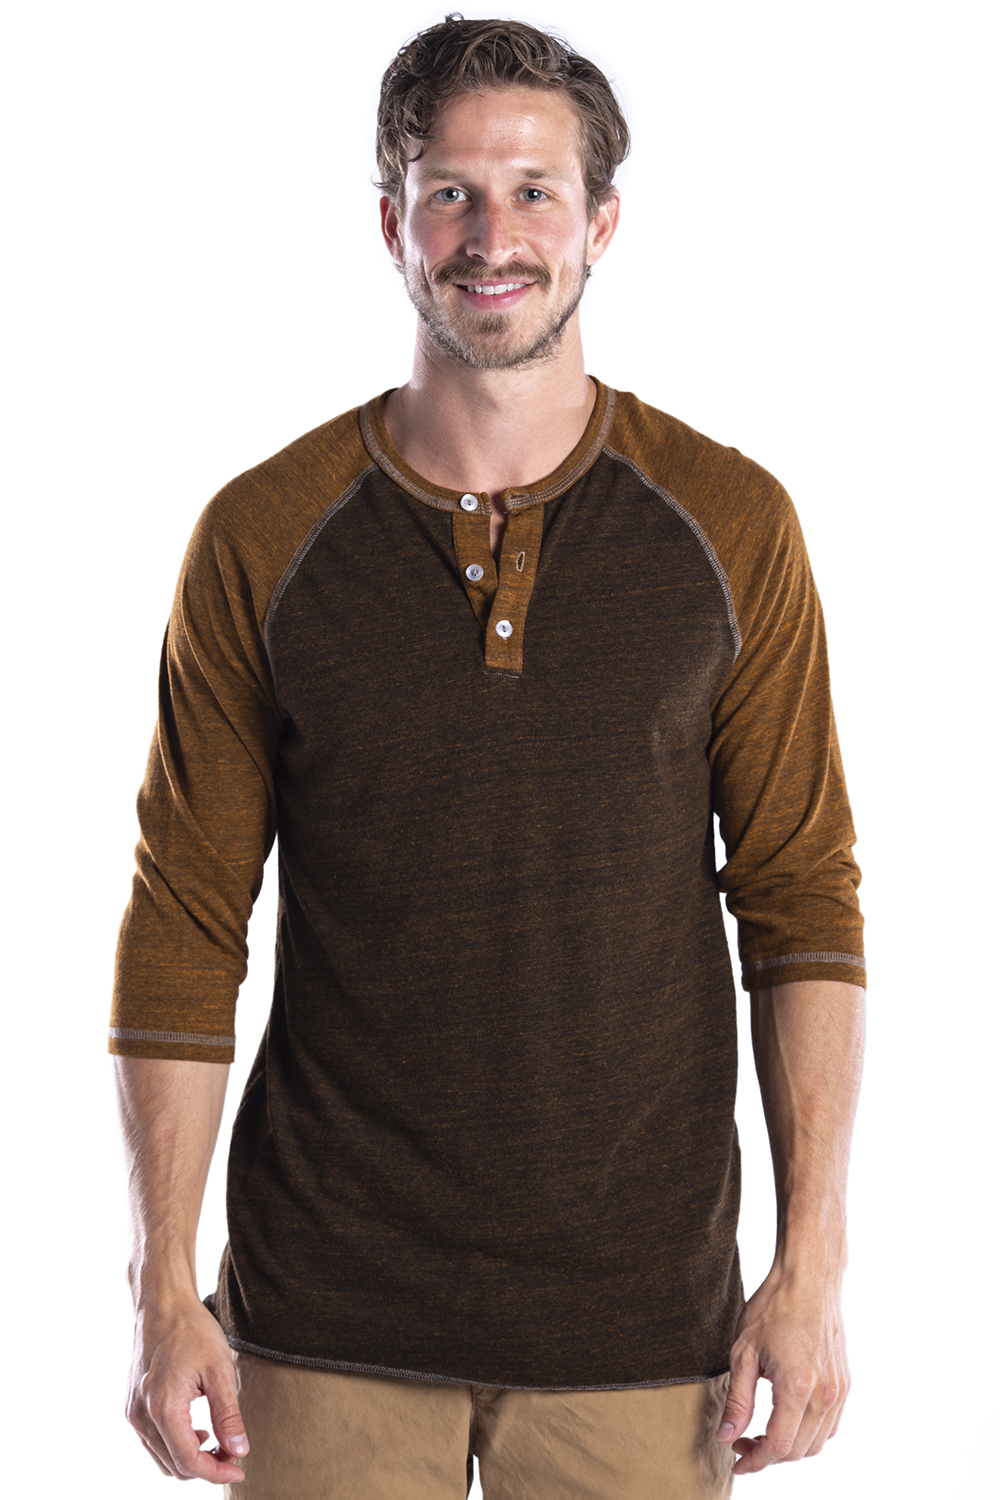 Men's 3/4 Sleeve Henley - Over-Dyed